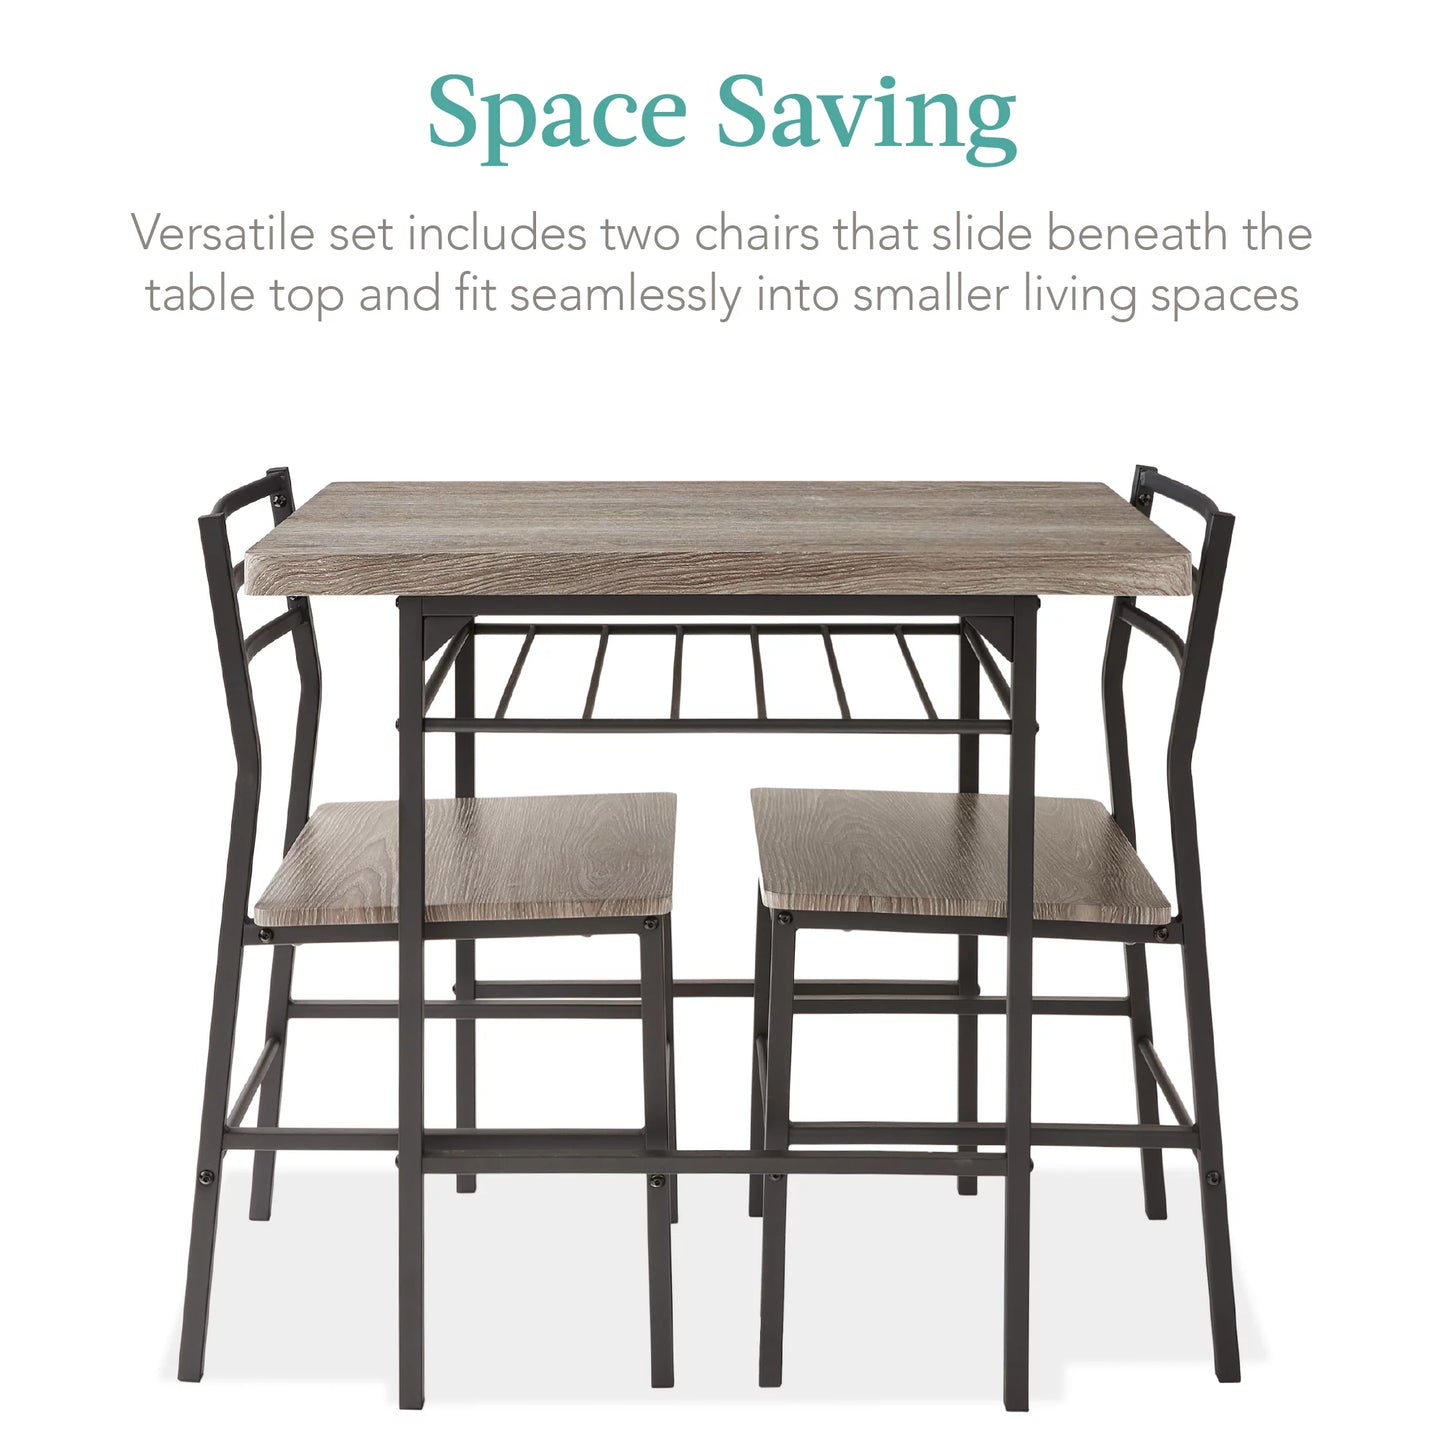 Best Choice Products 3-Piece Modern Dining Set, Square Table & Chairs Set w/ Steel Frame, Built-In Storage Rack - Brown